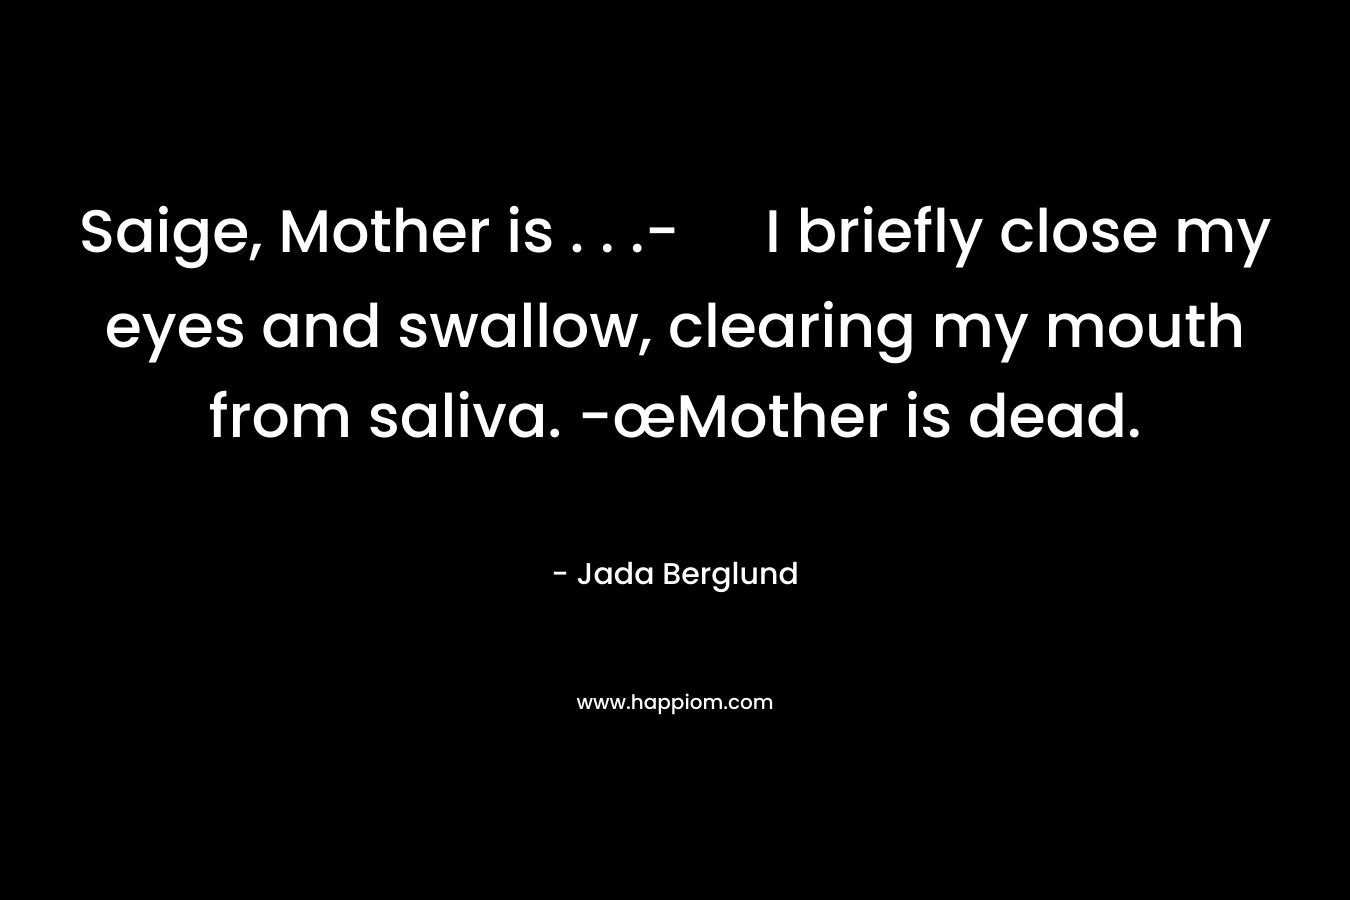 Saige, Mother is . . .- I briefly close my eyes and swallow, clearing my mouth from saliva. -œMother is dead. – Jada Berglund